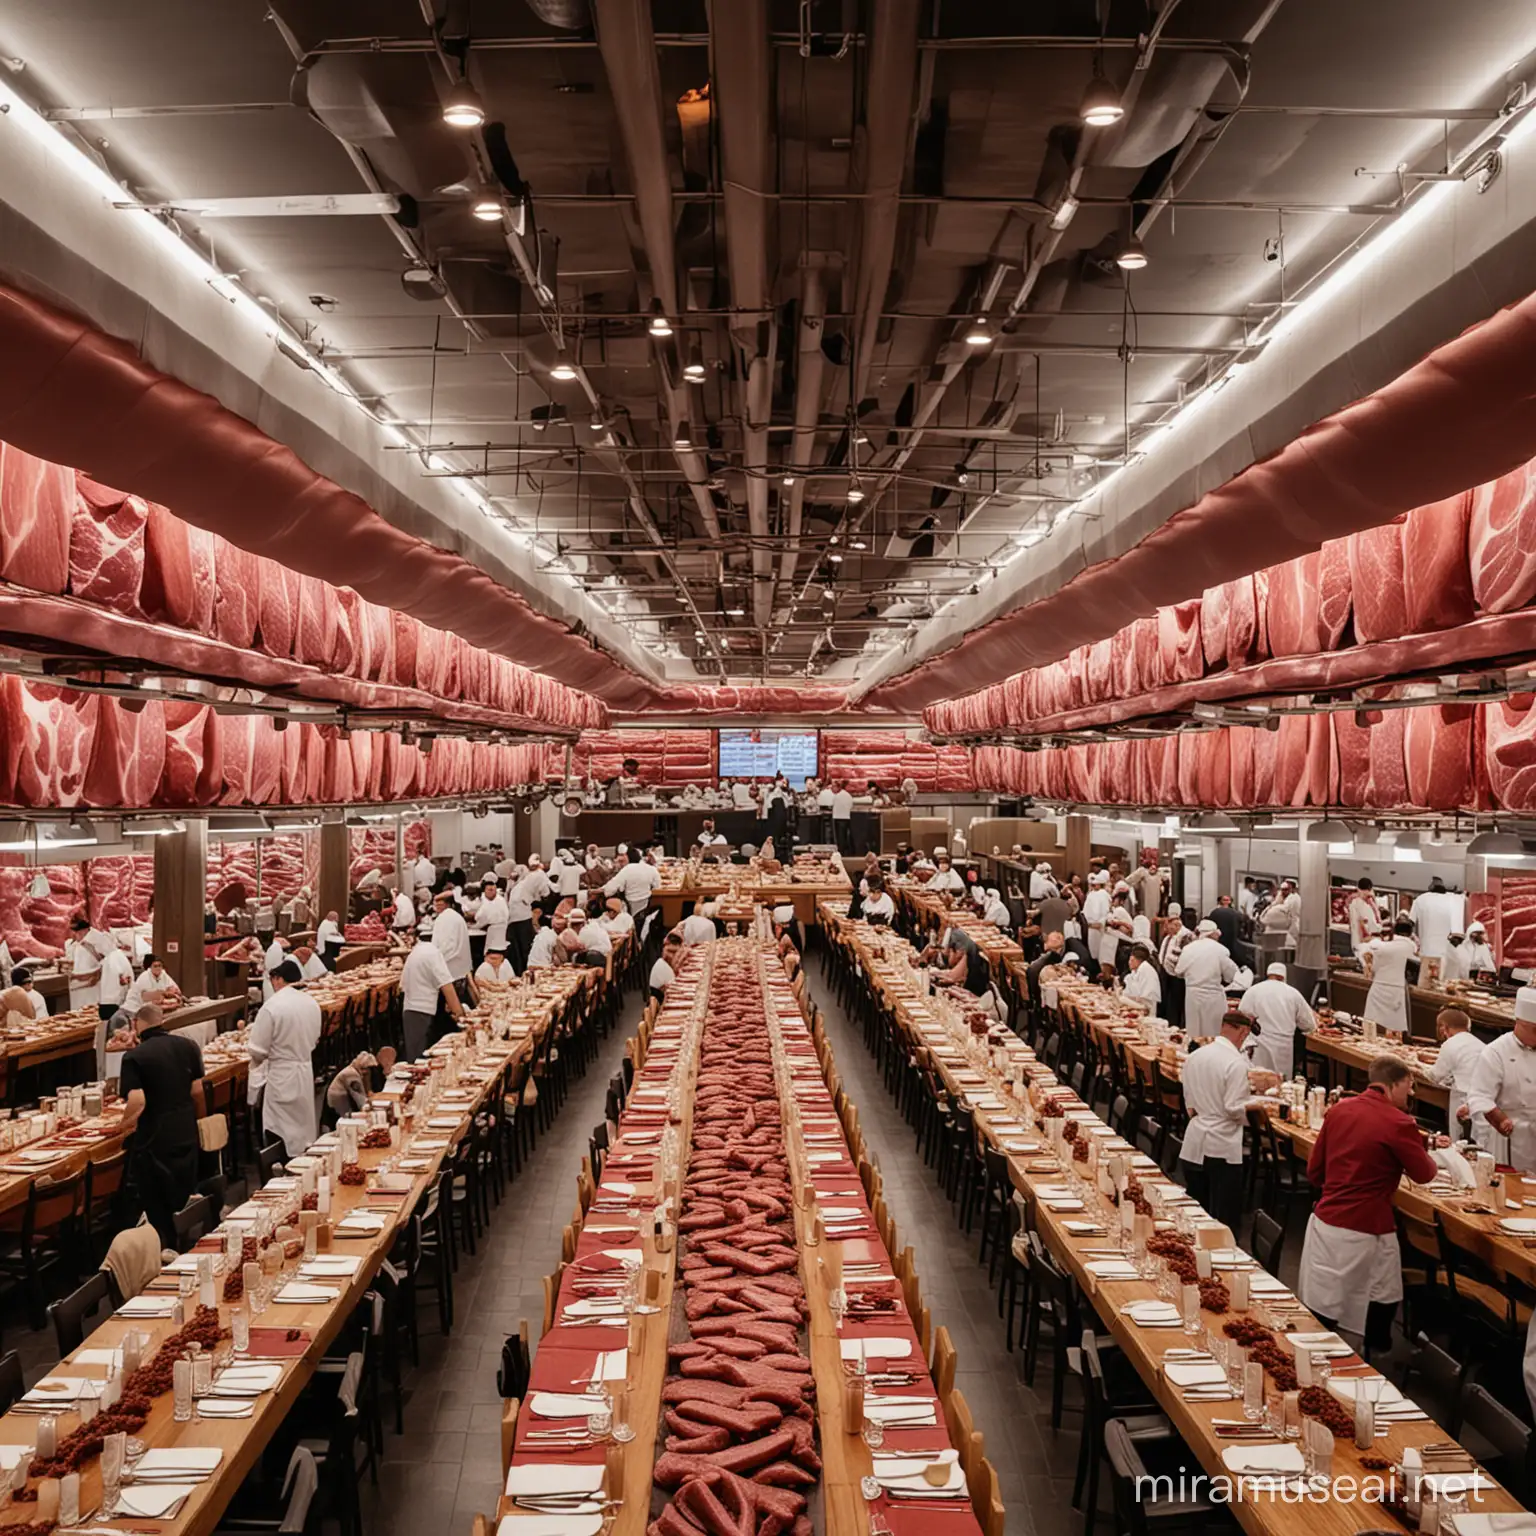 A very big restaurant with many cooks and cutting meat and big meat on the big table in the middle of the restaurant 